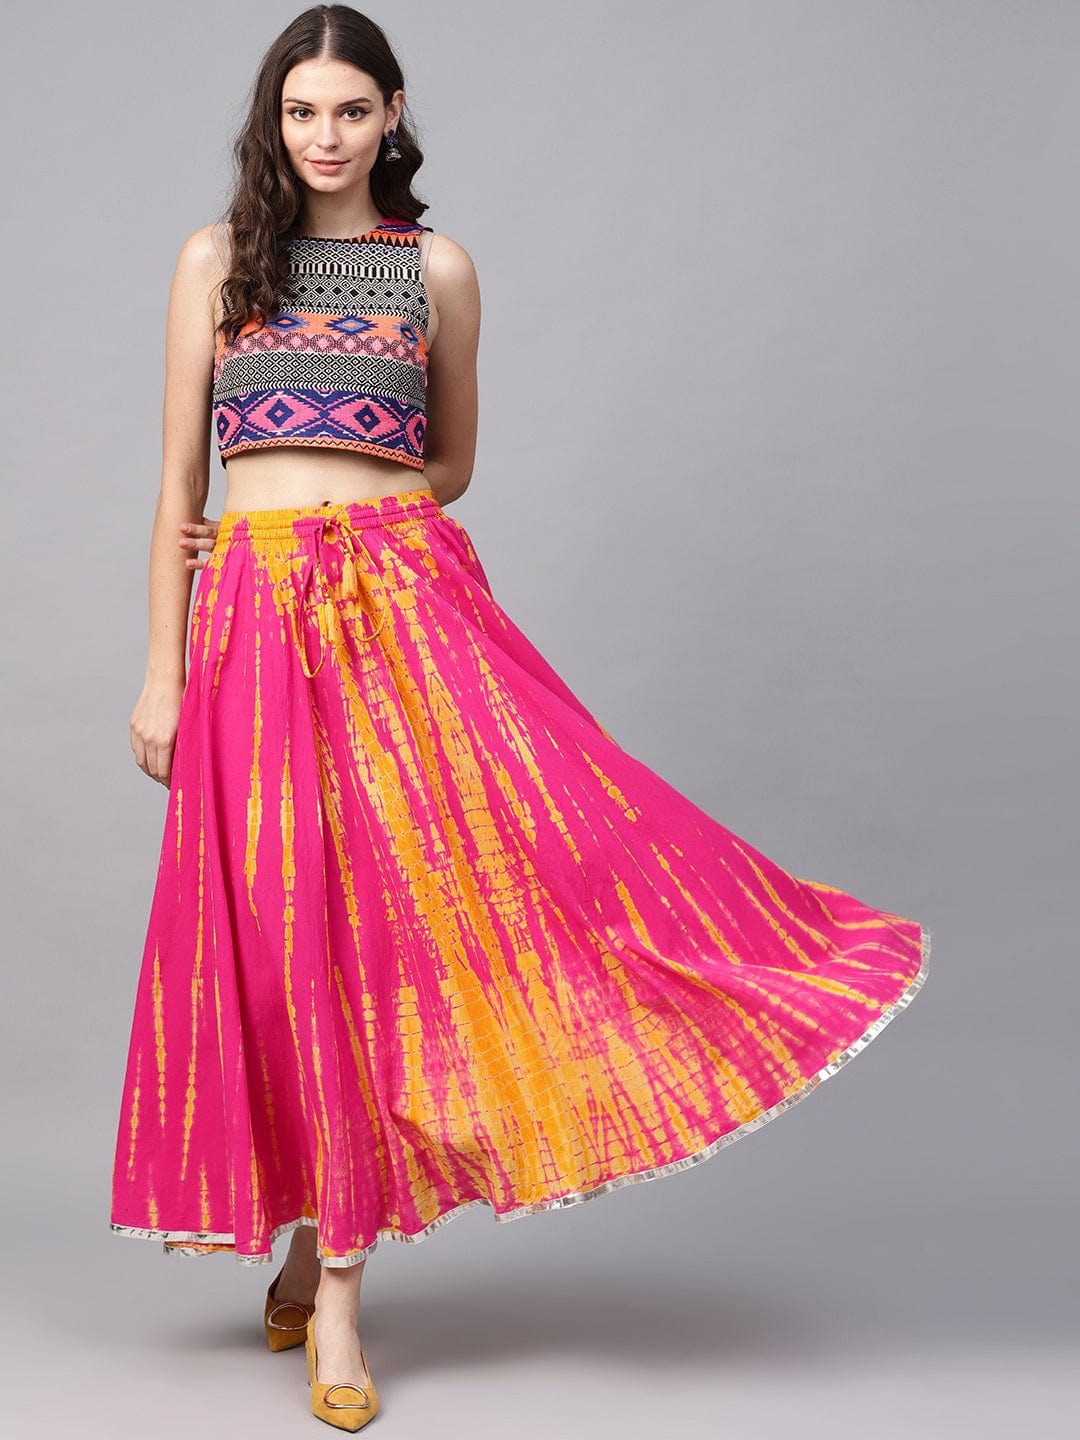 Explore Our Collection Of Ethnic Wear Skirt Sets For Elegance Redefined